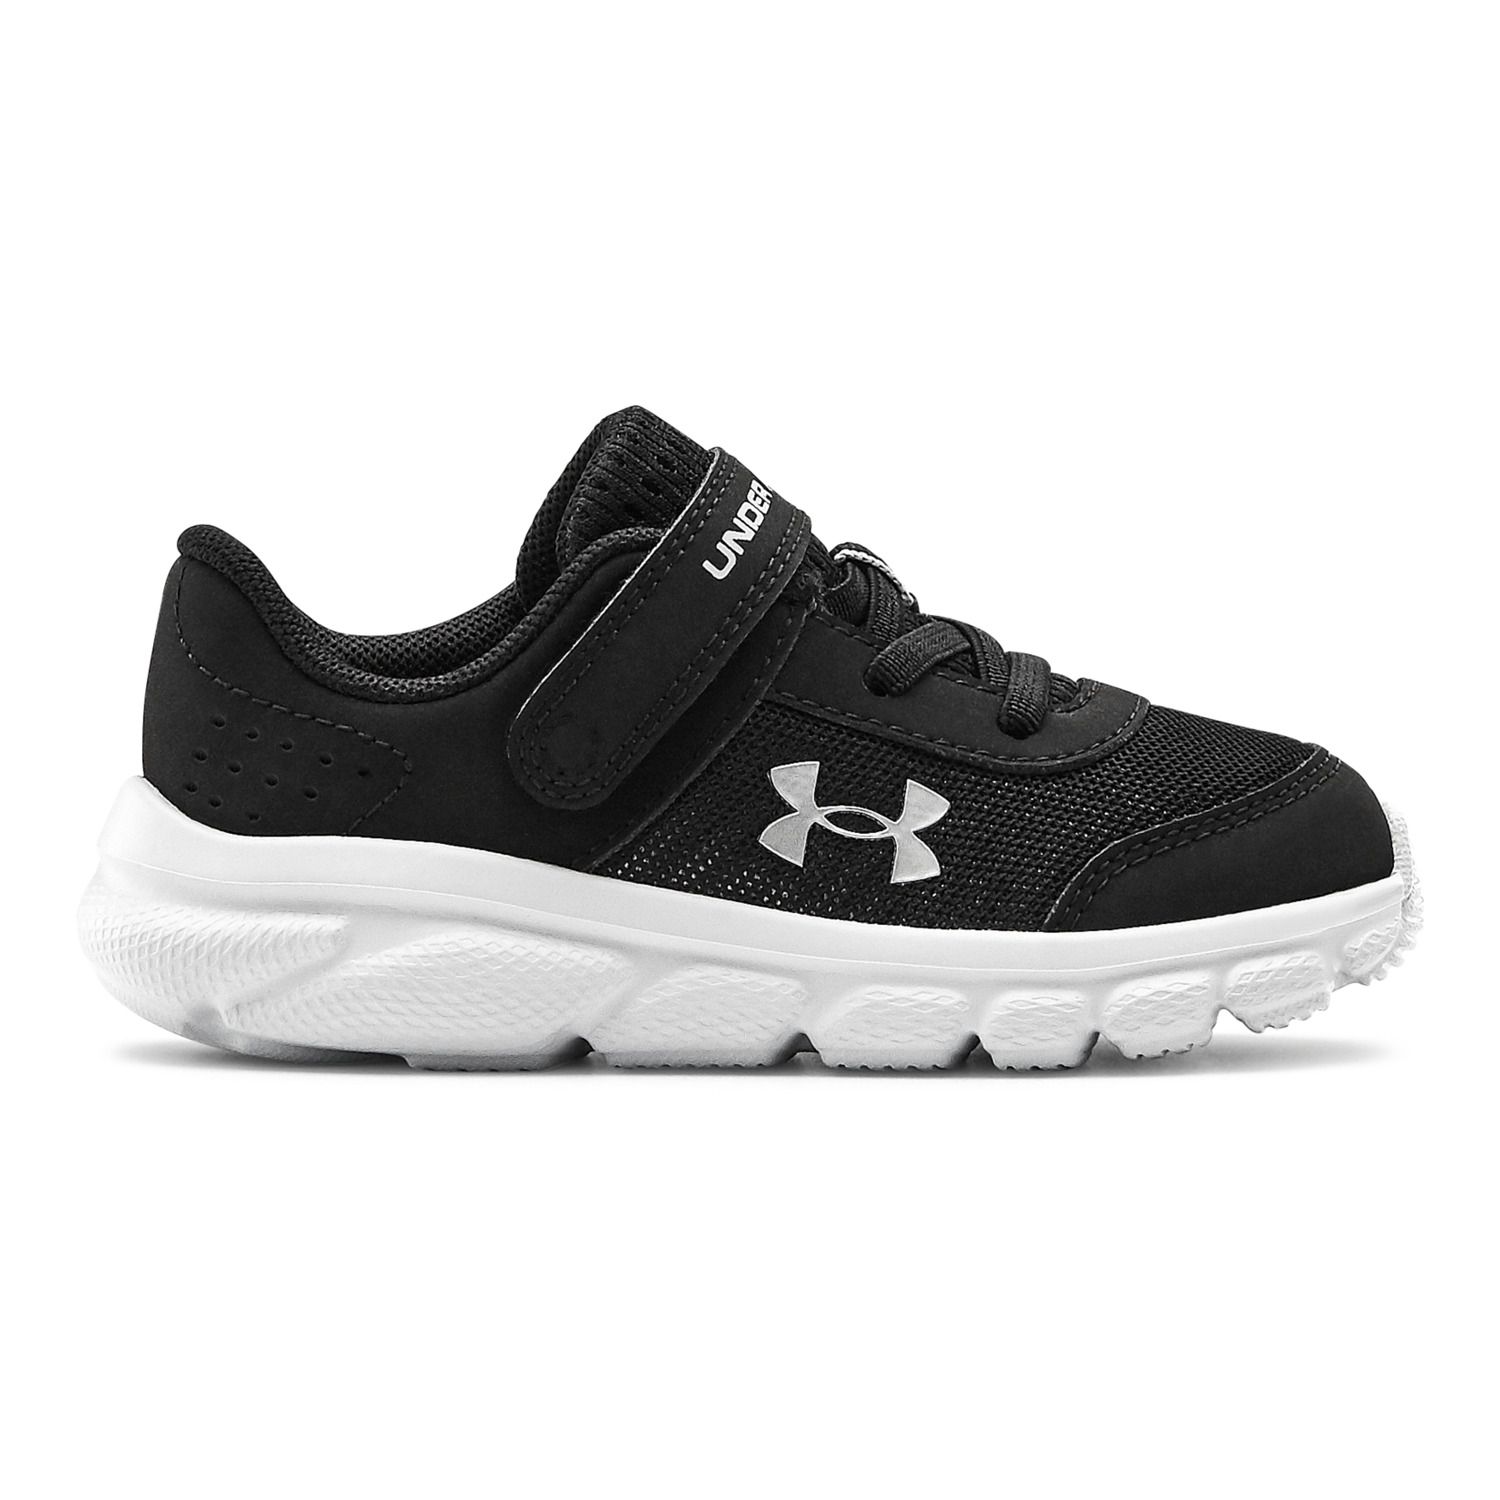 toddler size 11 under armour shoes